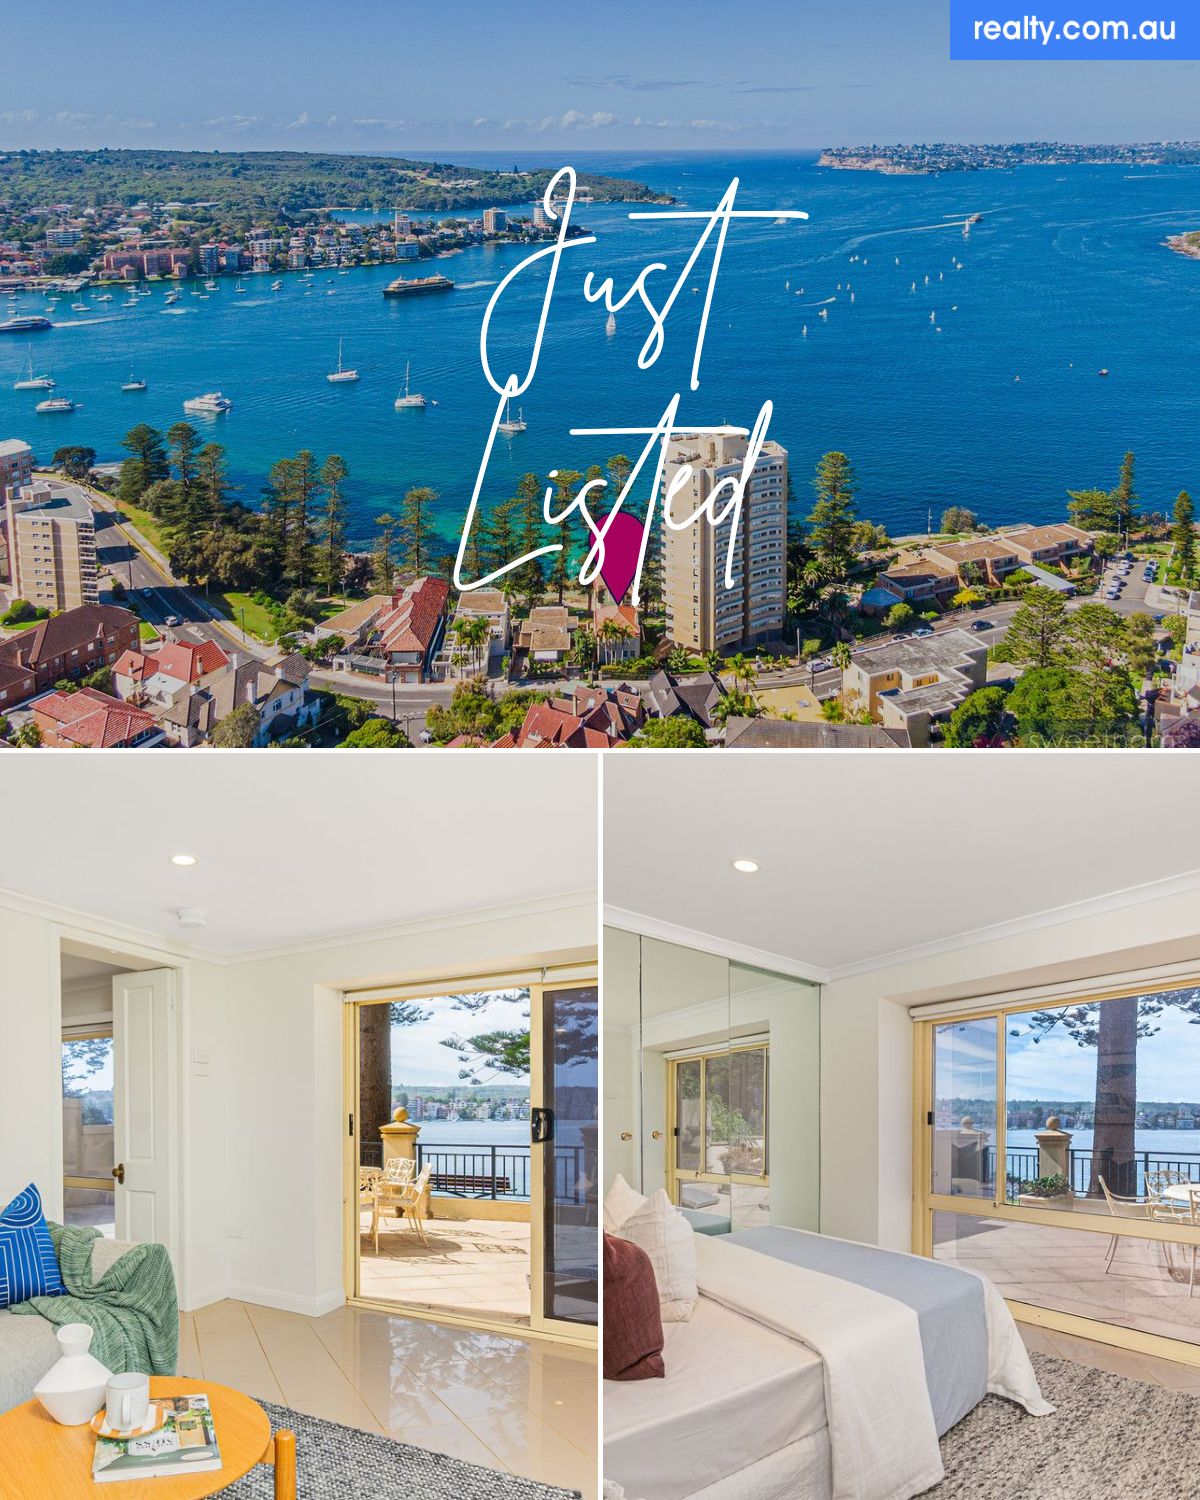 9/49 The Crescent, Manly, NSW 2095 | Realty.com.au